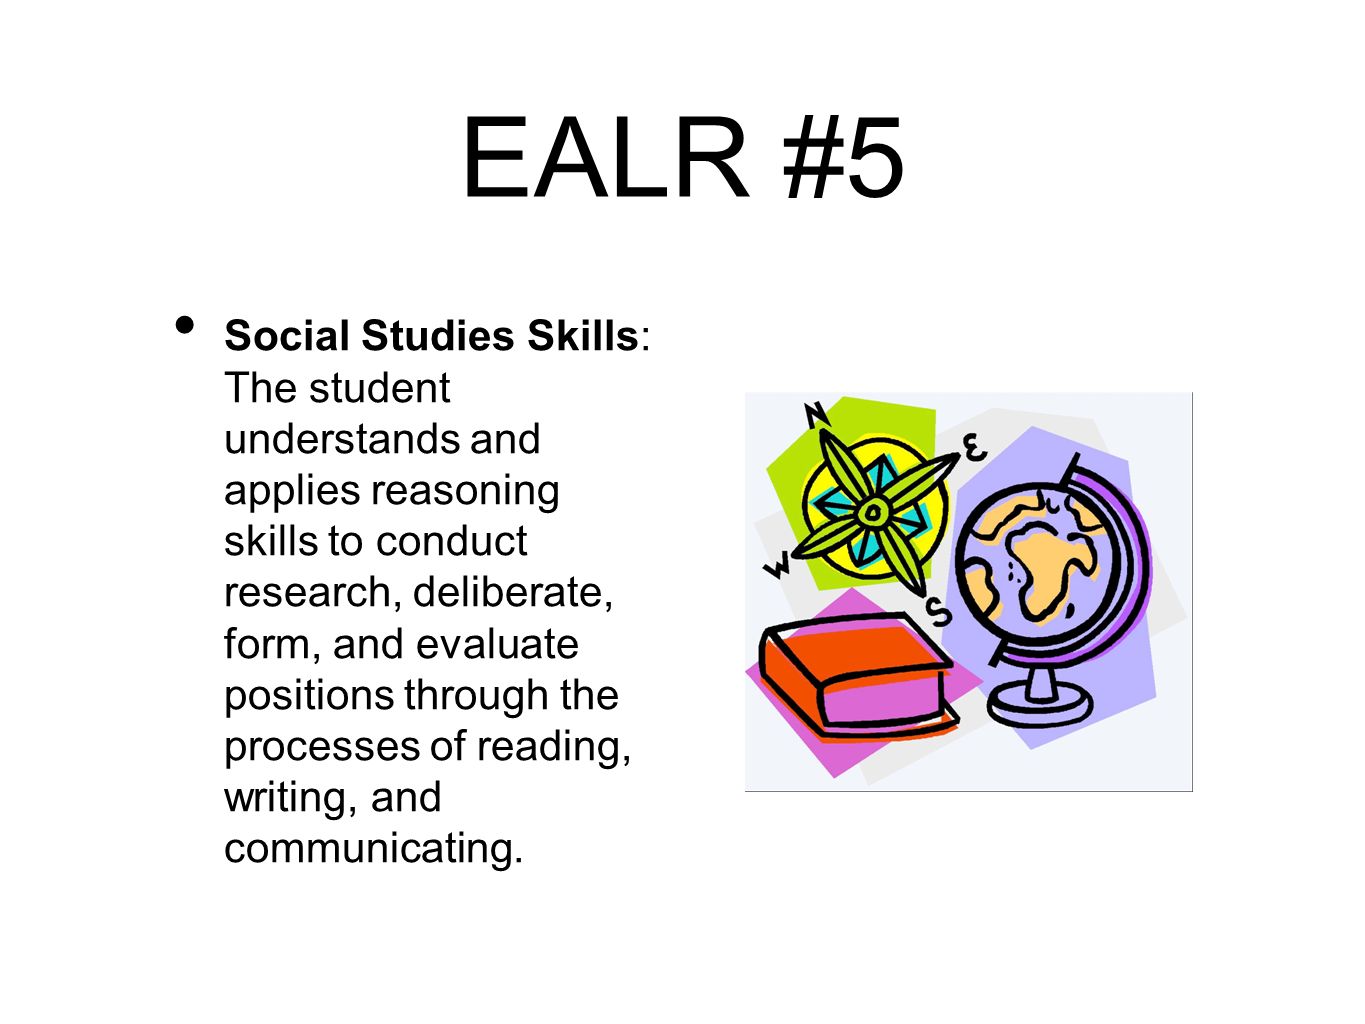 EALR #5 Social Studies Skills: The student understands and applies reasoning skills to conduct research, deliberate, form, and evaluate positions through the processes of reading, writing, and communicating.